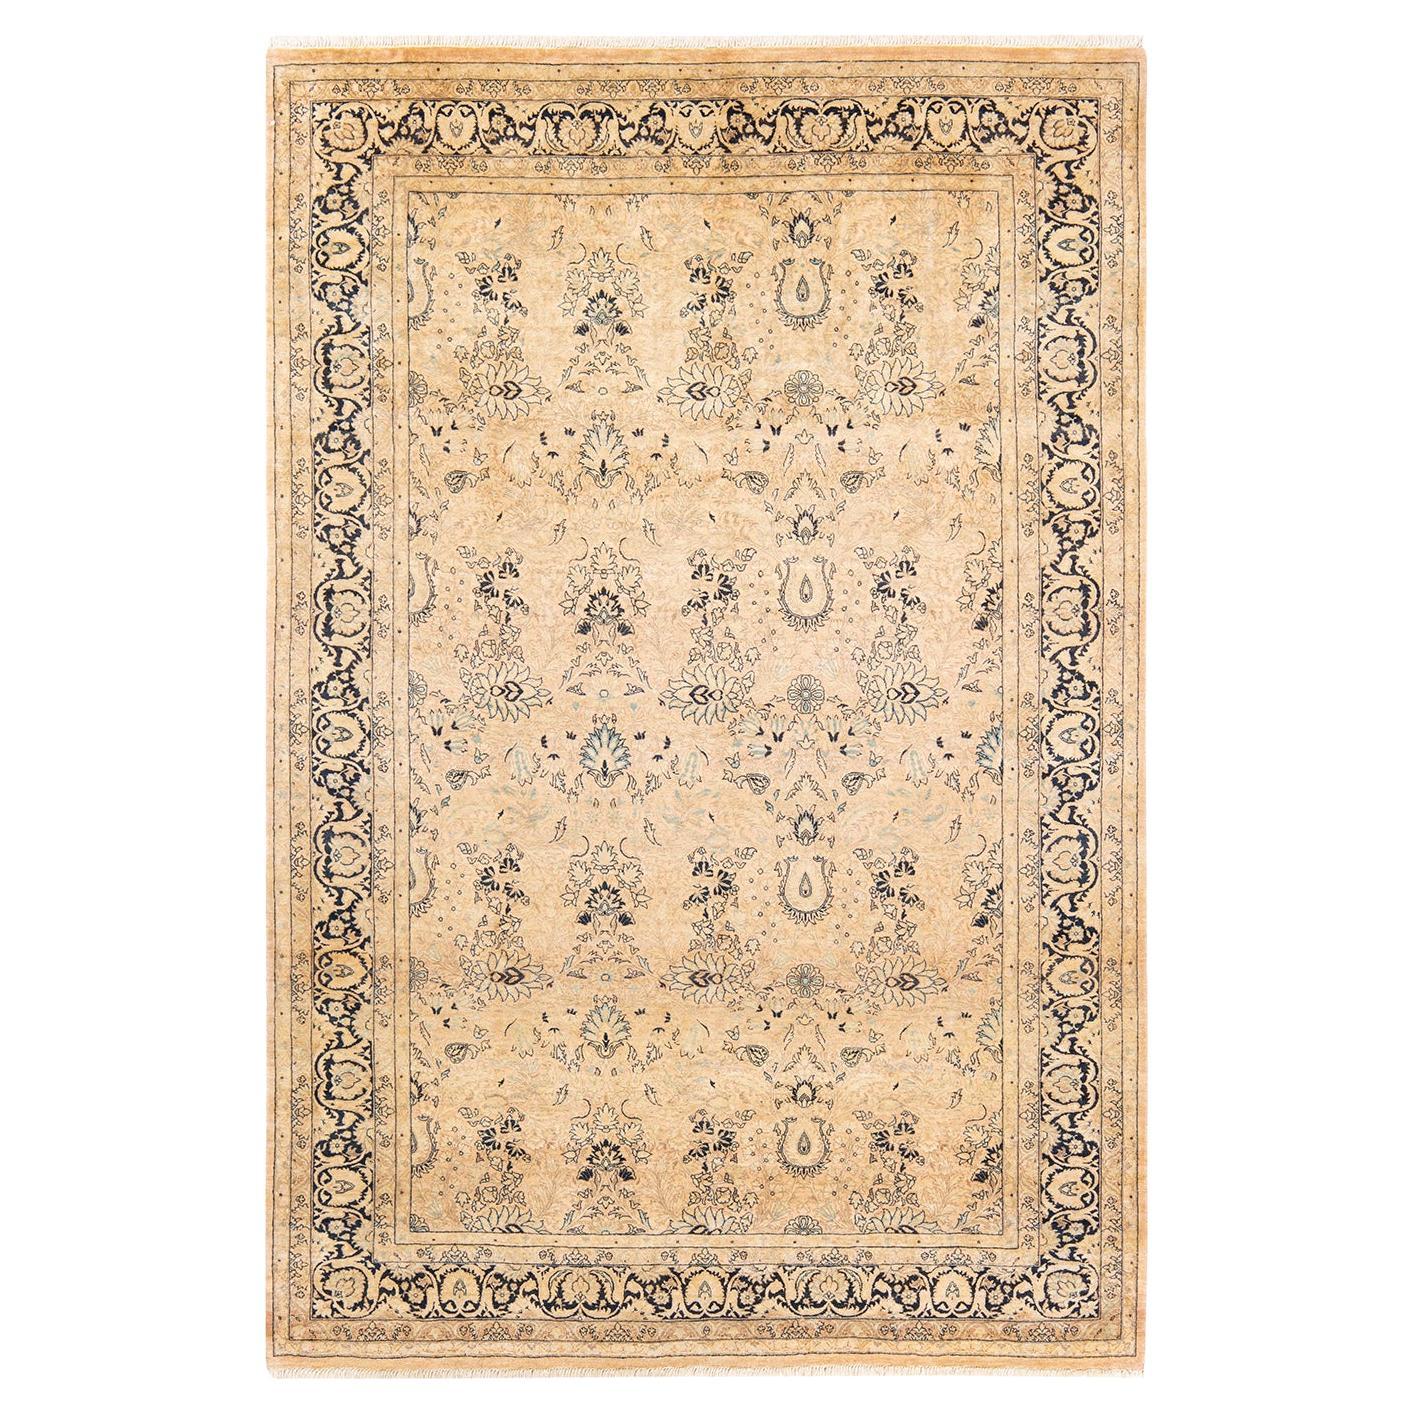 One-of-a-kind Hand Knotted Traditional Floral Mogul Beige Area Rug